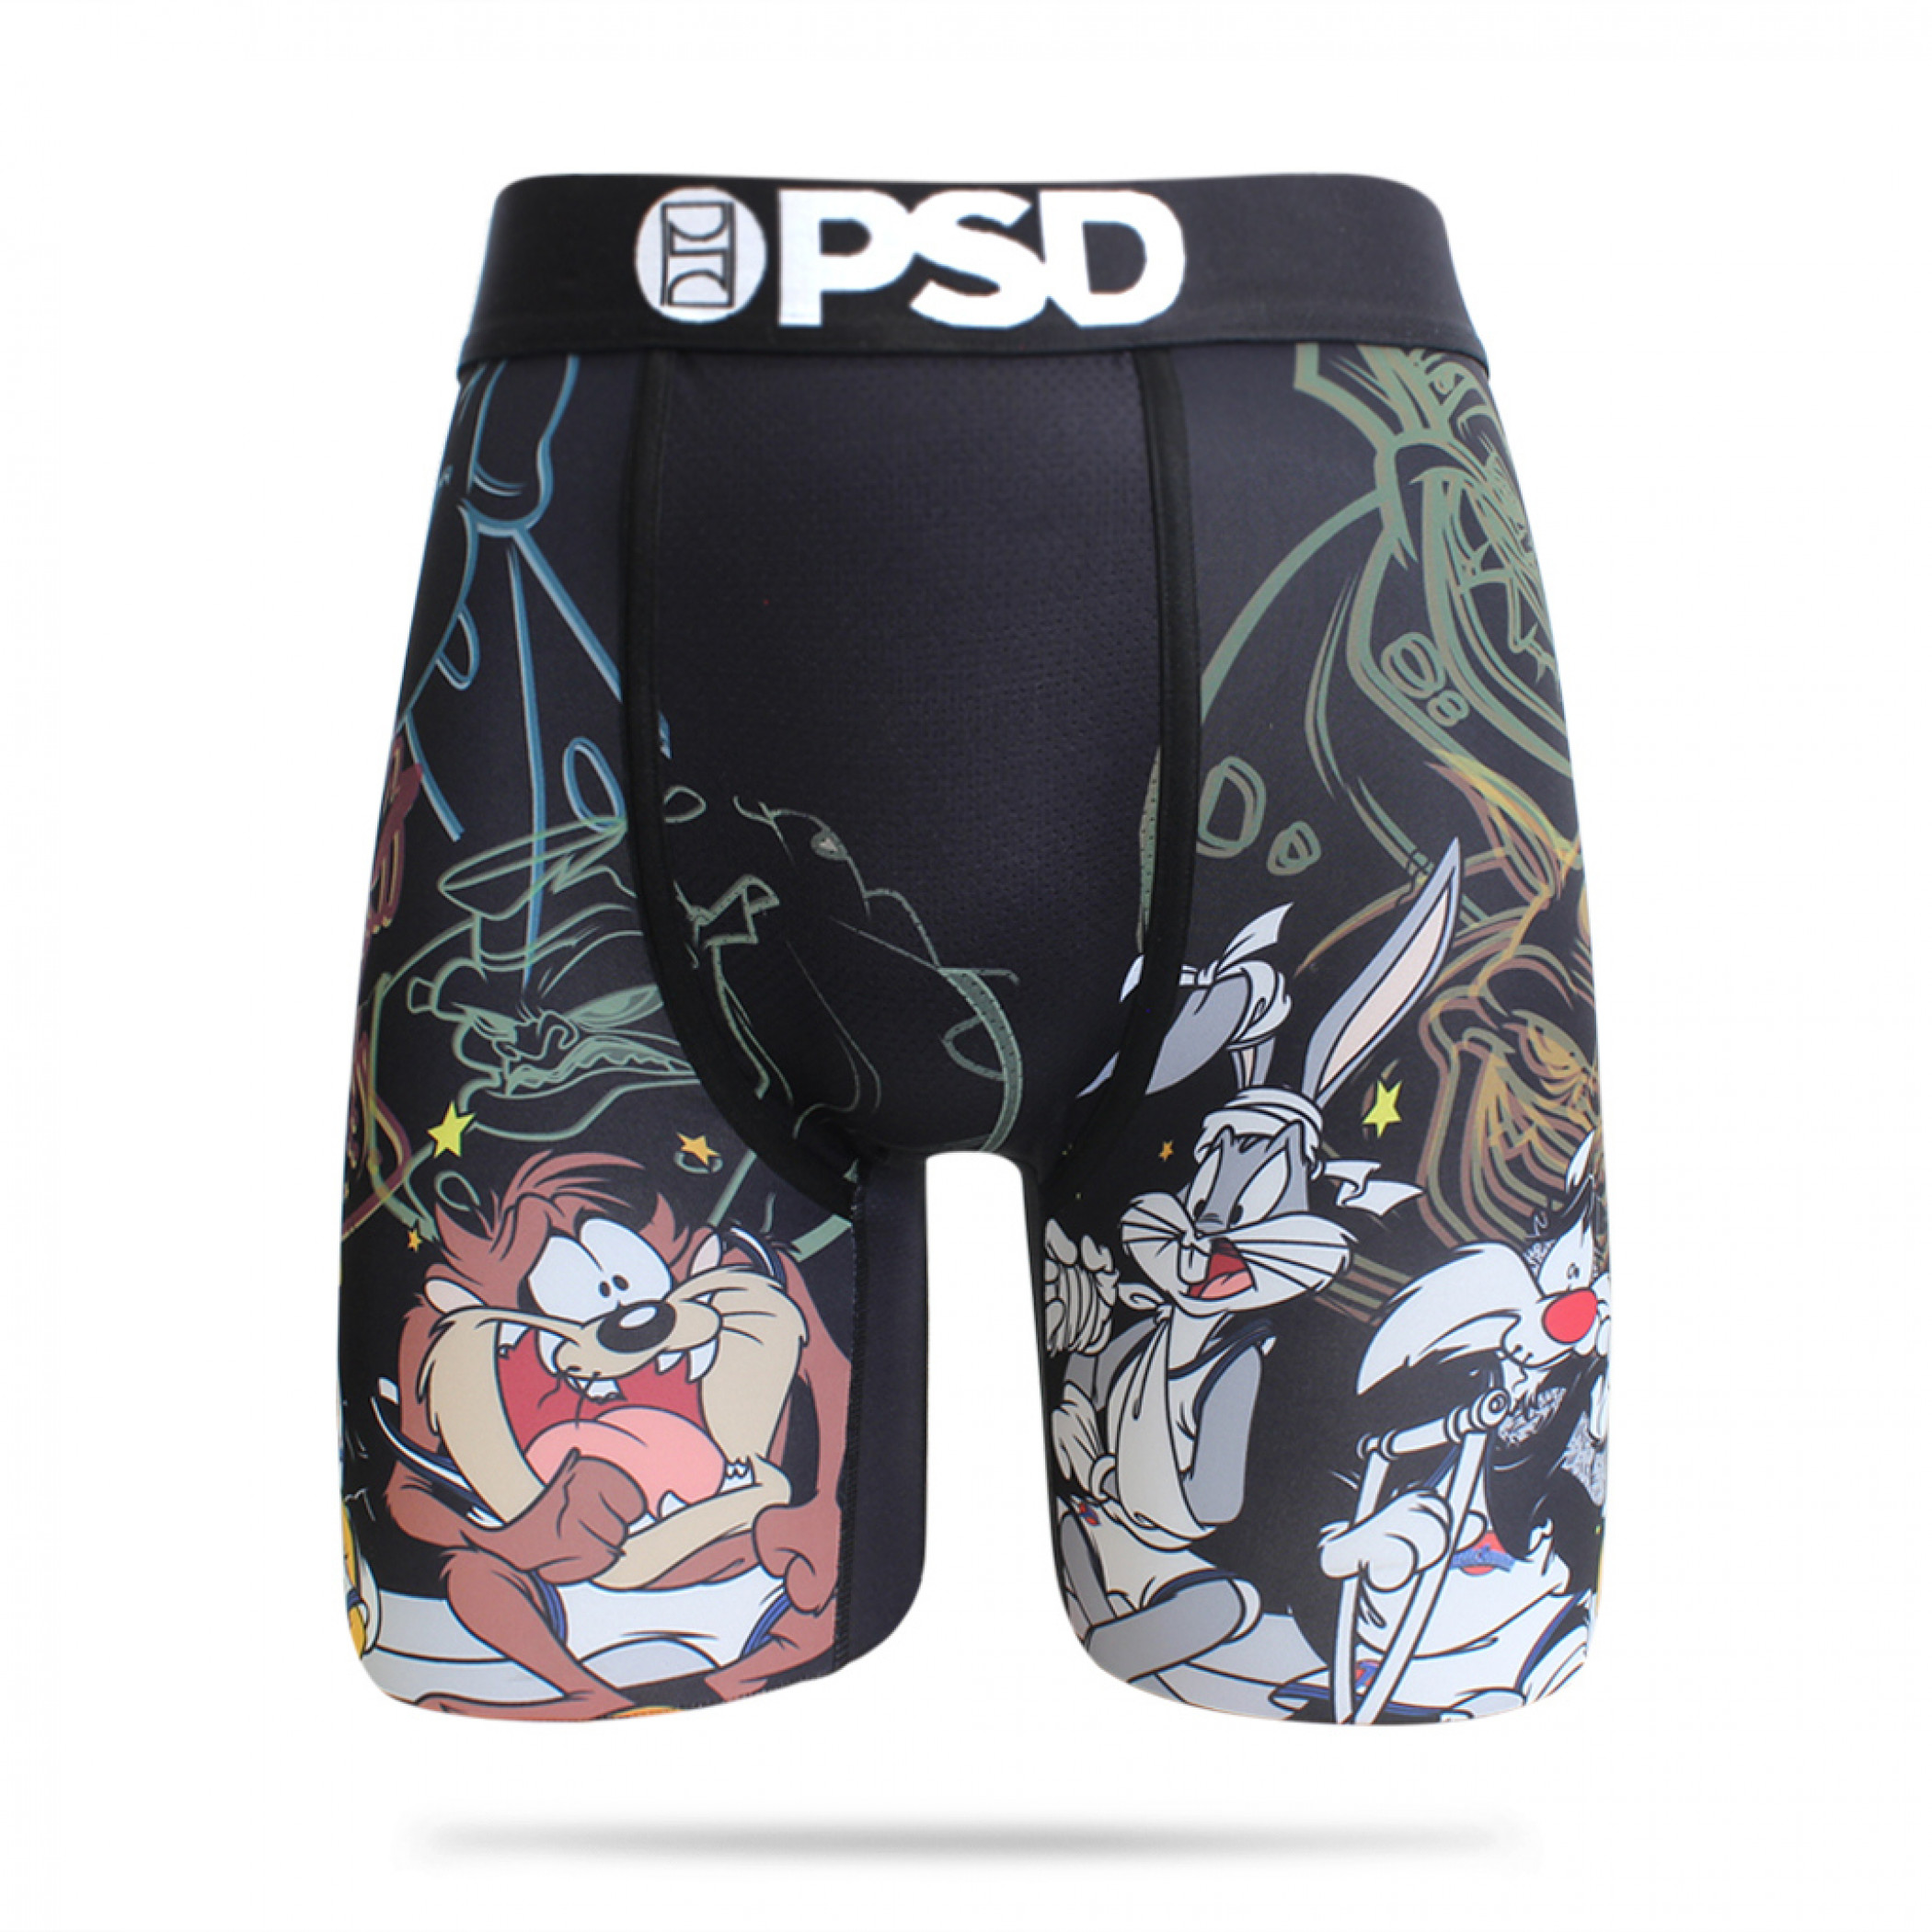 Download Space Jam Injured Toon Squad Psd Boxers Briefs